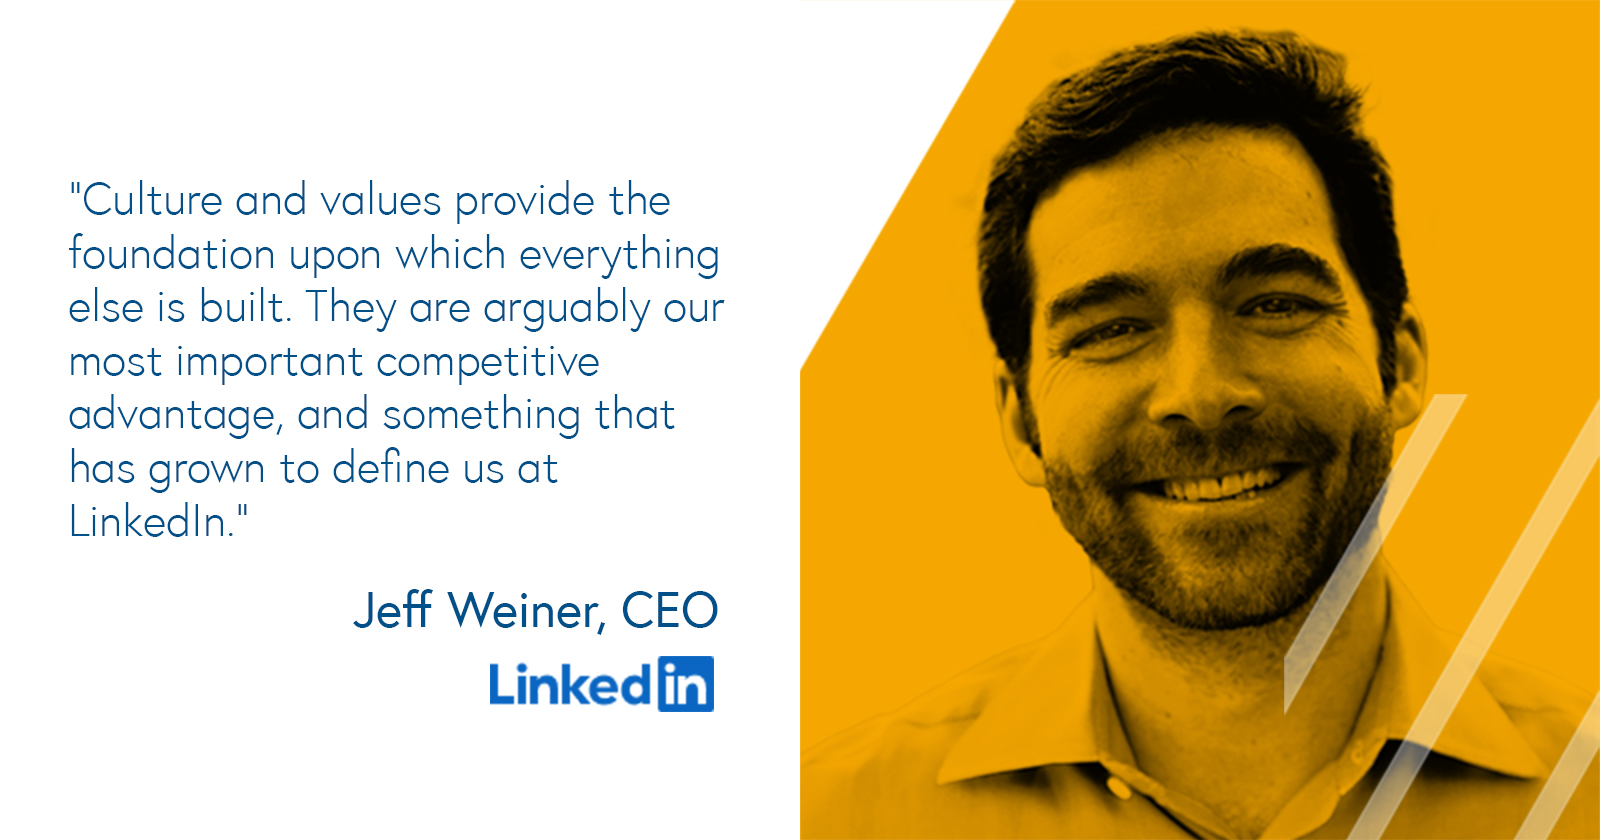 Jeff Weiner, CEO of LinkedIn on building a business culture based on strong values